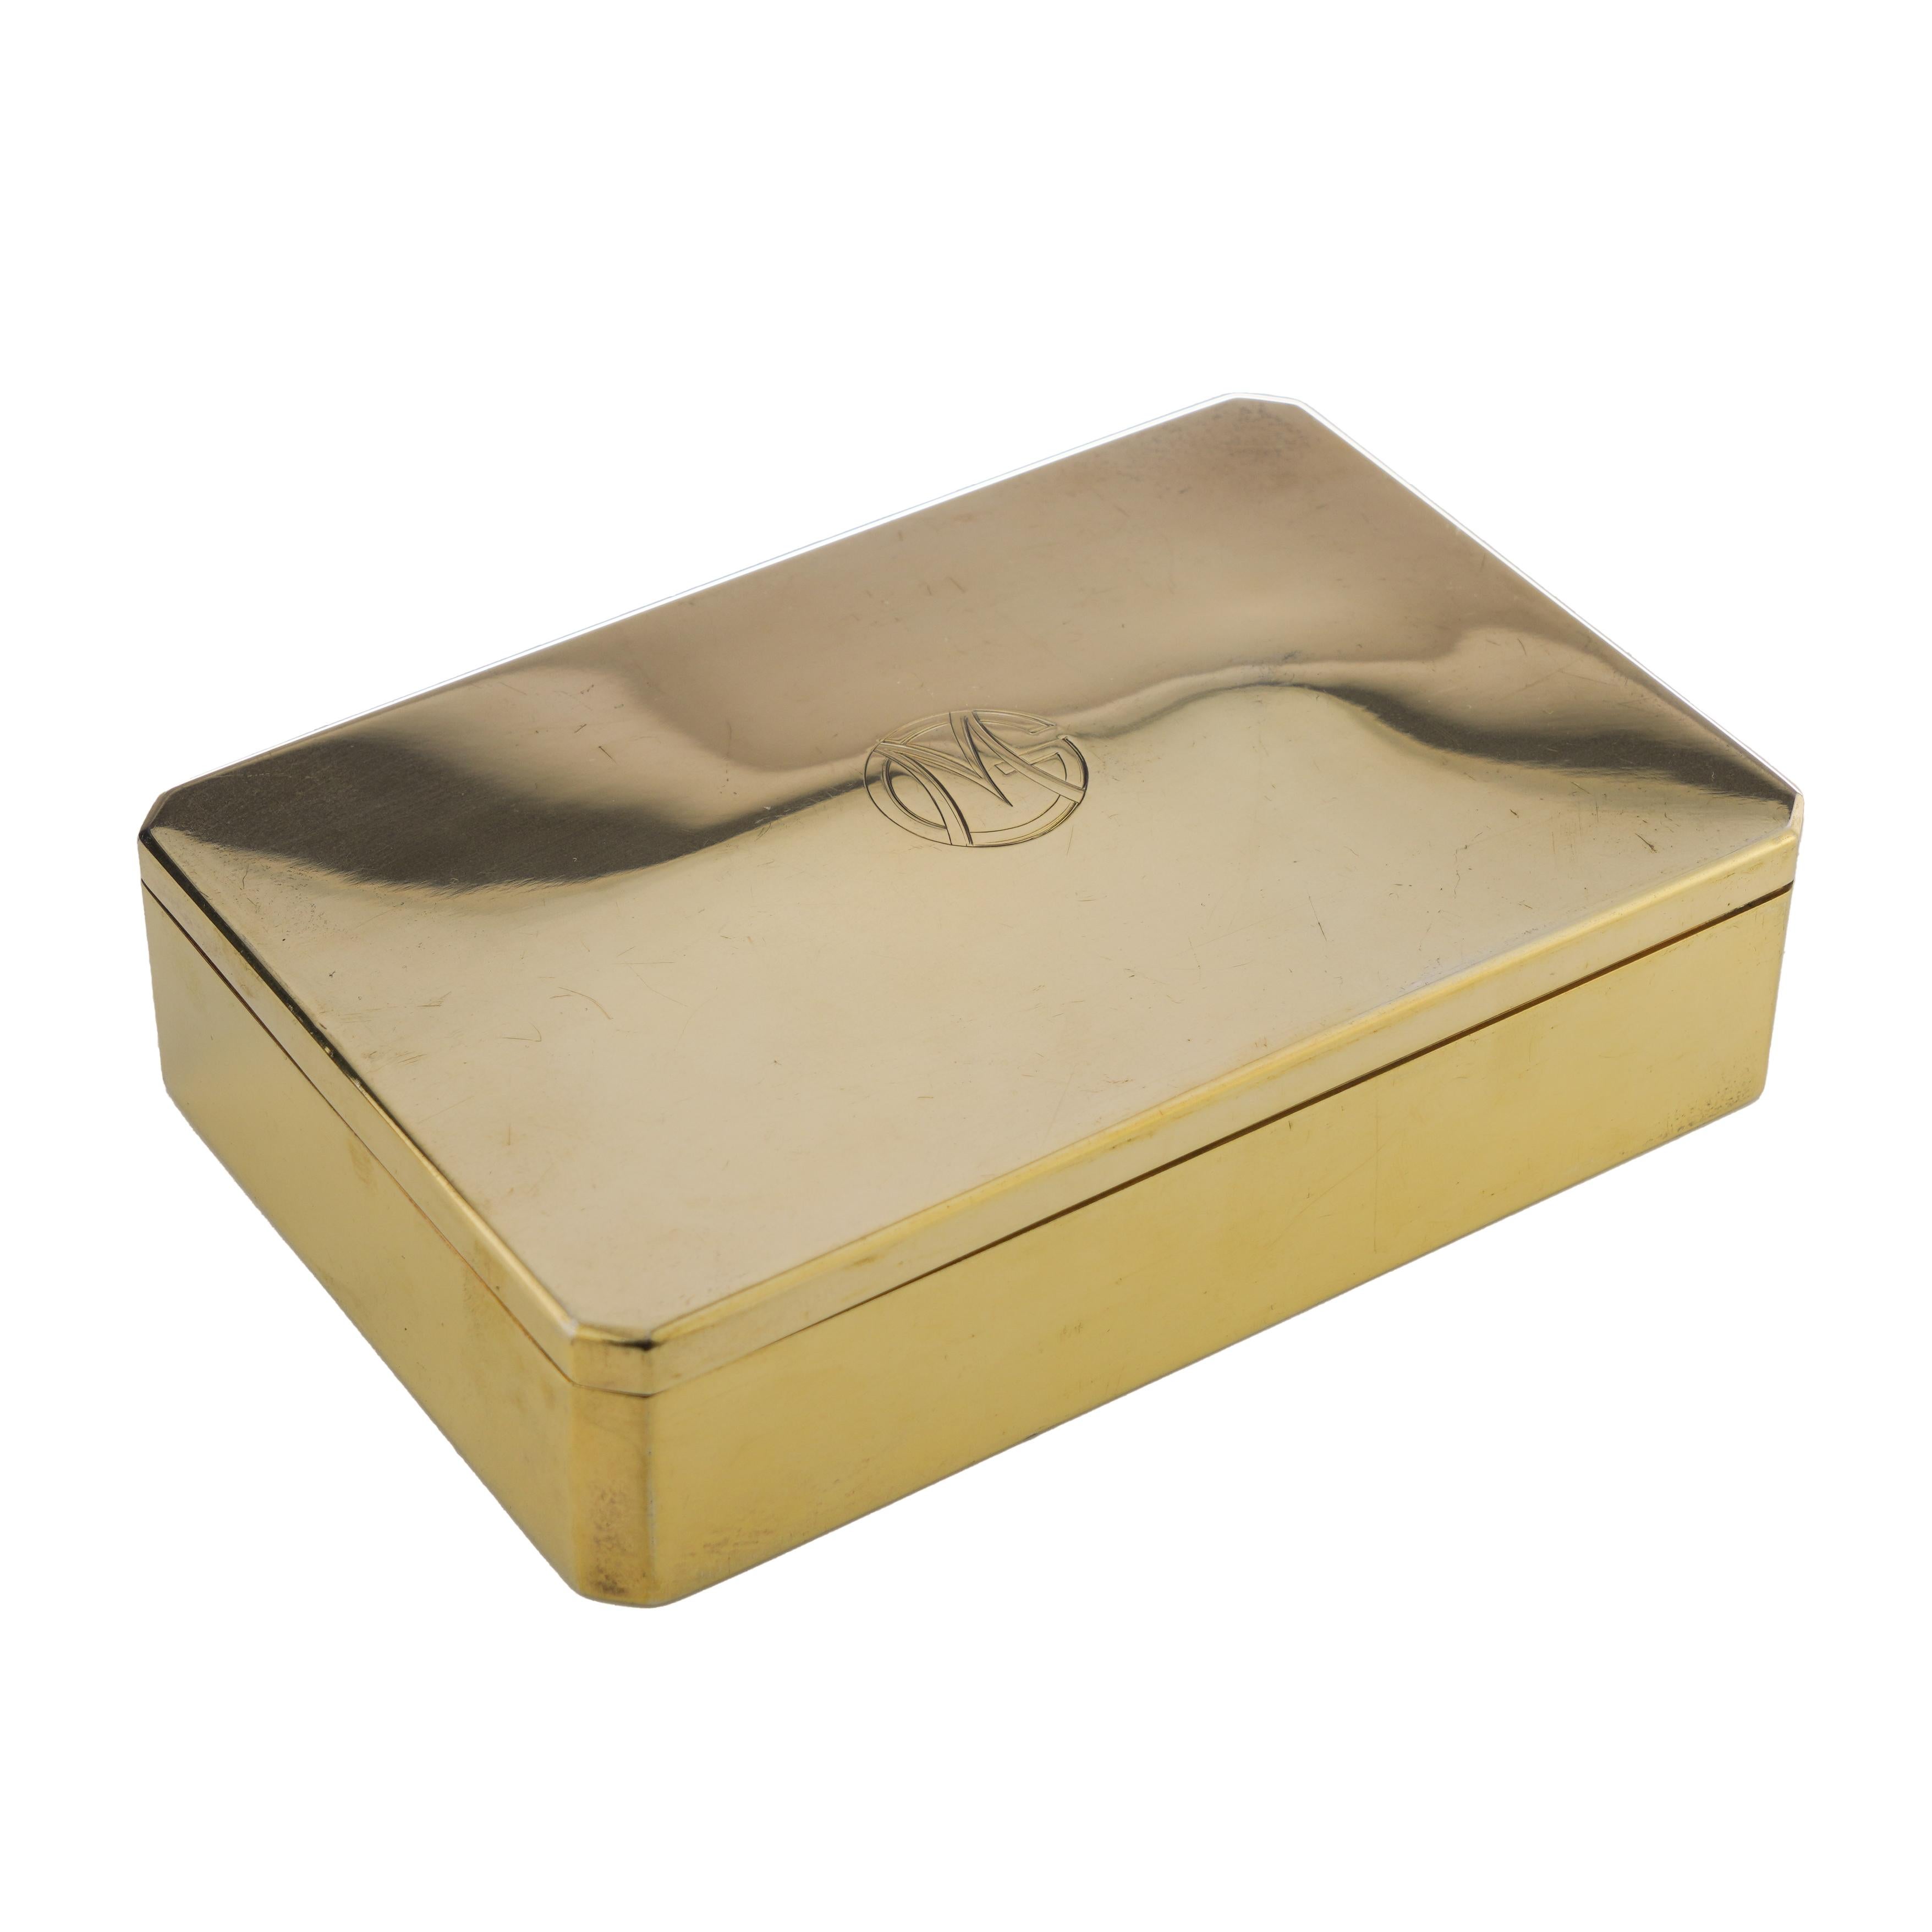 Gustave Keller Art Deco silver-gilt sandwich box with M& G monogram.
Made in France, Paris
Hallmarked with French marks, with 950/1000 silver purity. 

 Approx. dimensions - 
 Measures: length x width x height:15 x 10 x 3.5 cm 
 Weight: 398